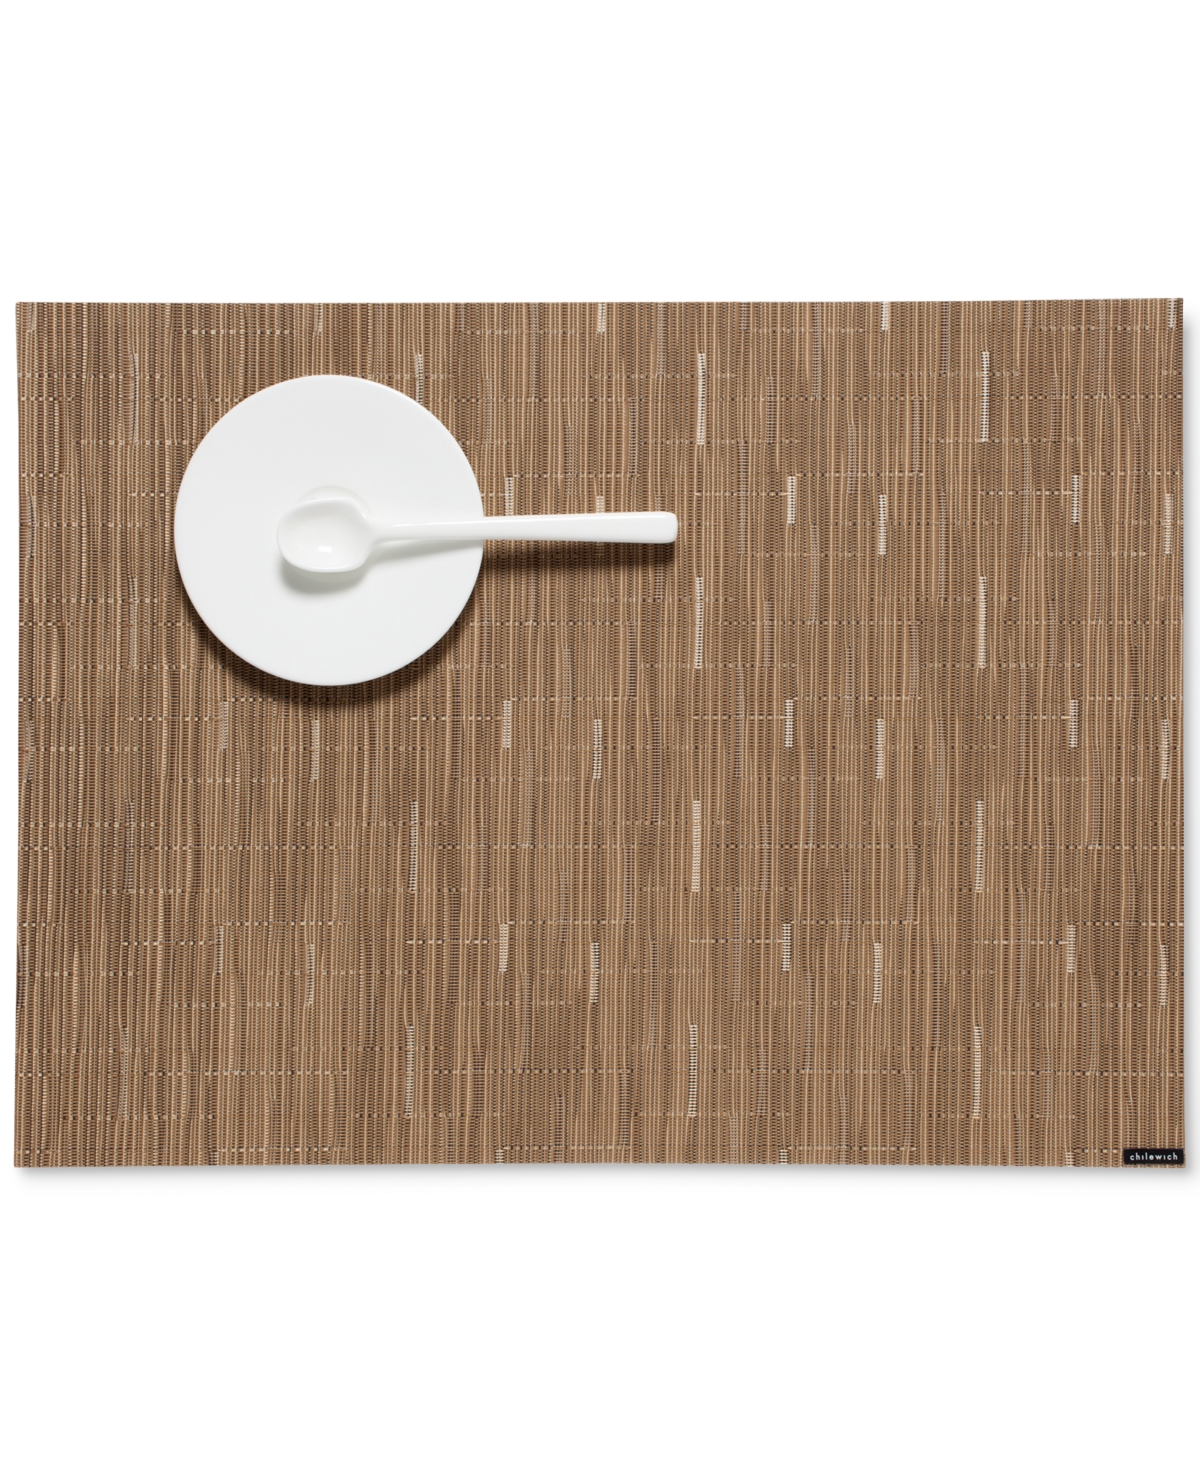 154837 Chilewich Bamboo Woven Vinyl Placemat 14 x 19 sku 154837